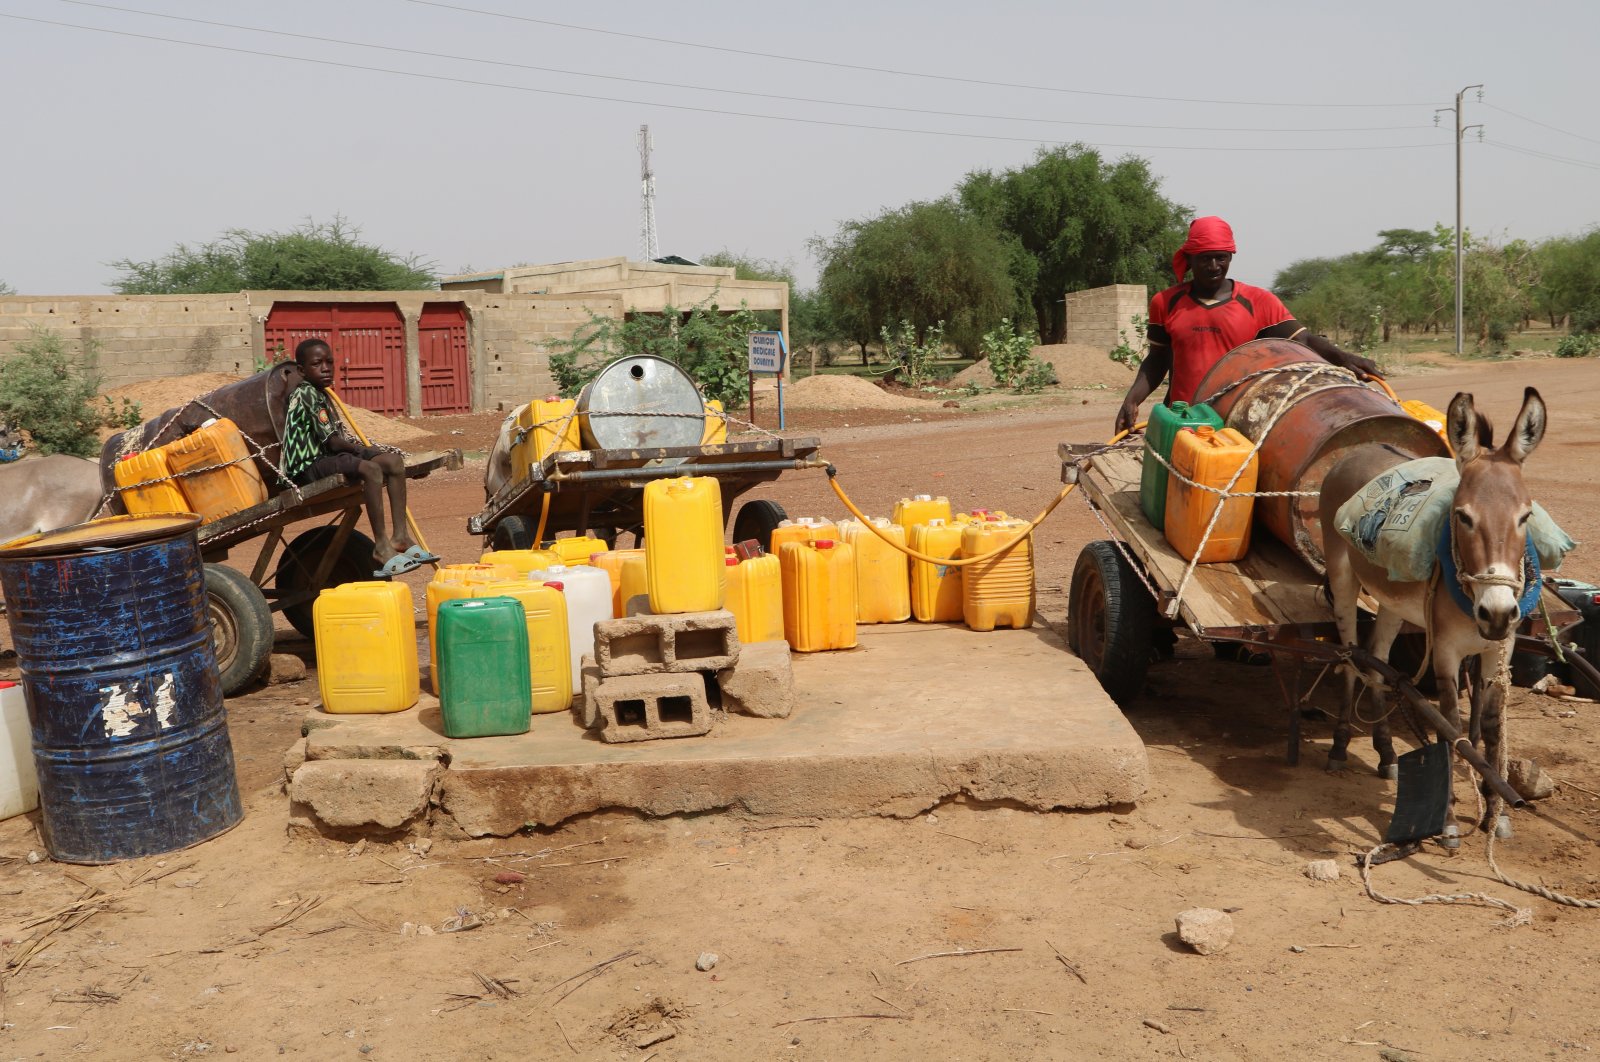 Residents fill up water containers in Dori, Burkina Faso, July 7, 2021. (AP Photo)